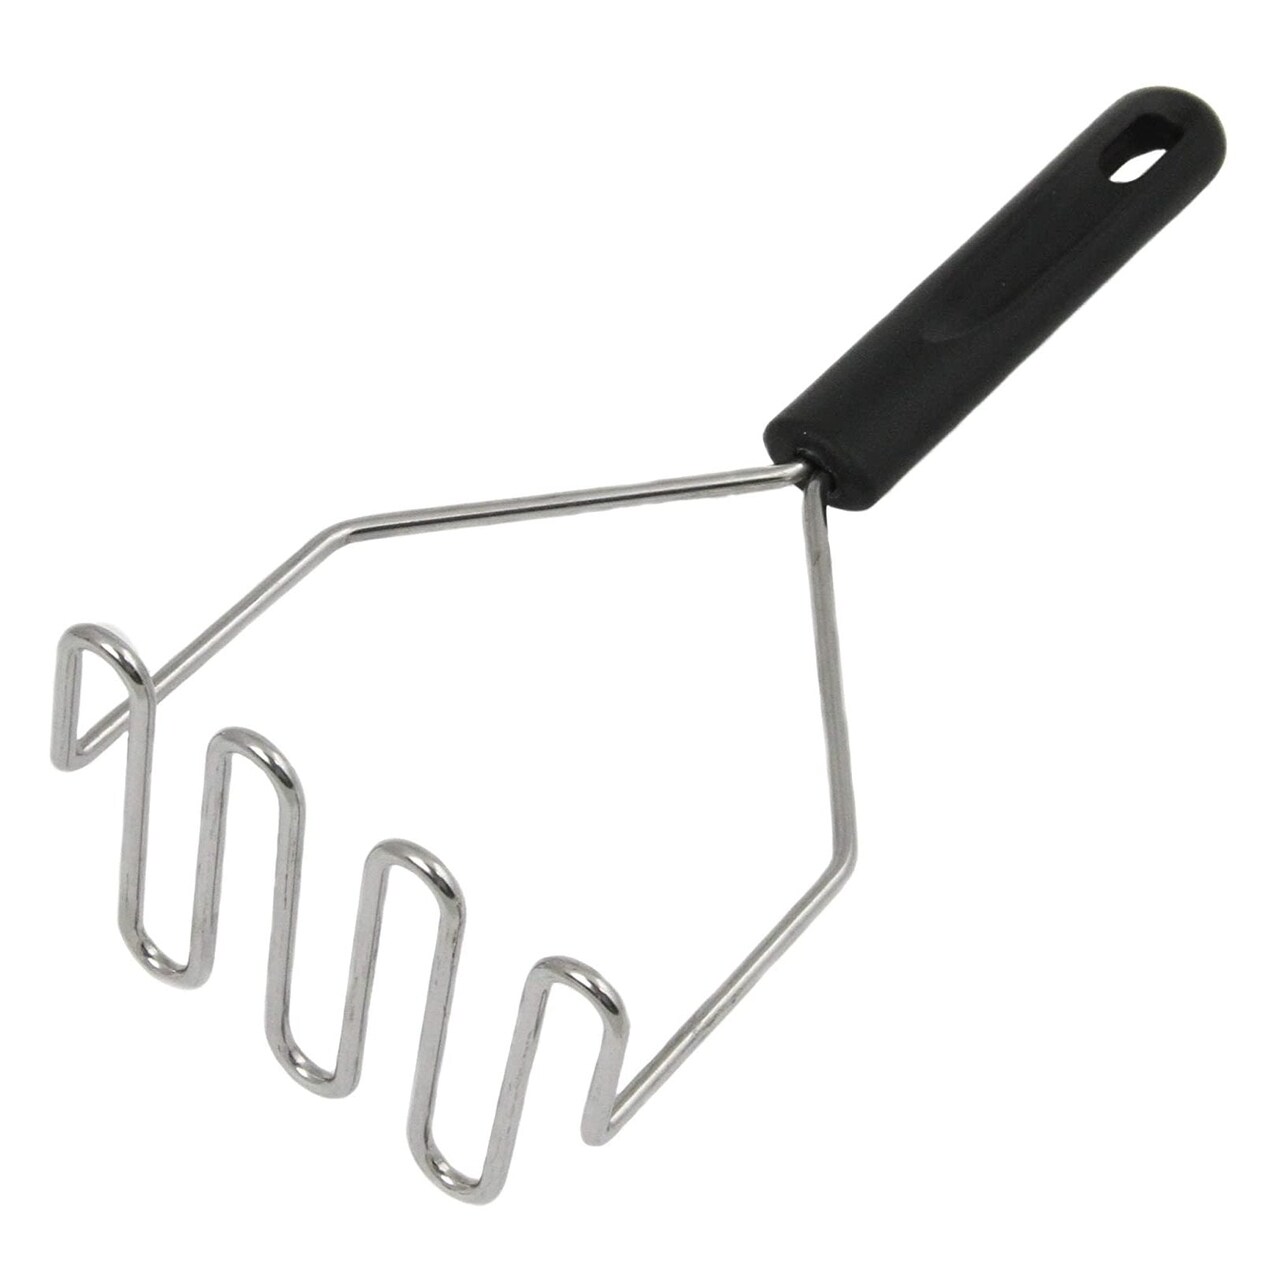 Chef Craft Stainless Steel Wire Hand Potato Masher - Also Great for  Avocados, Beans, Baby Food